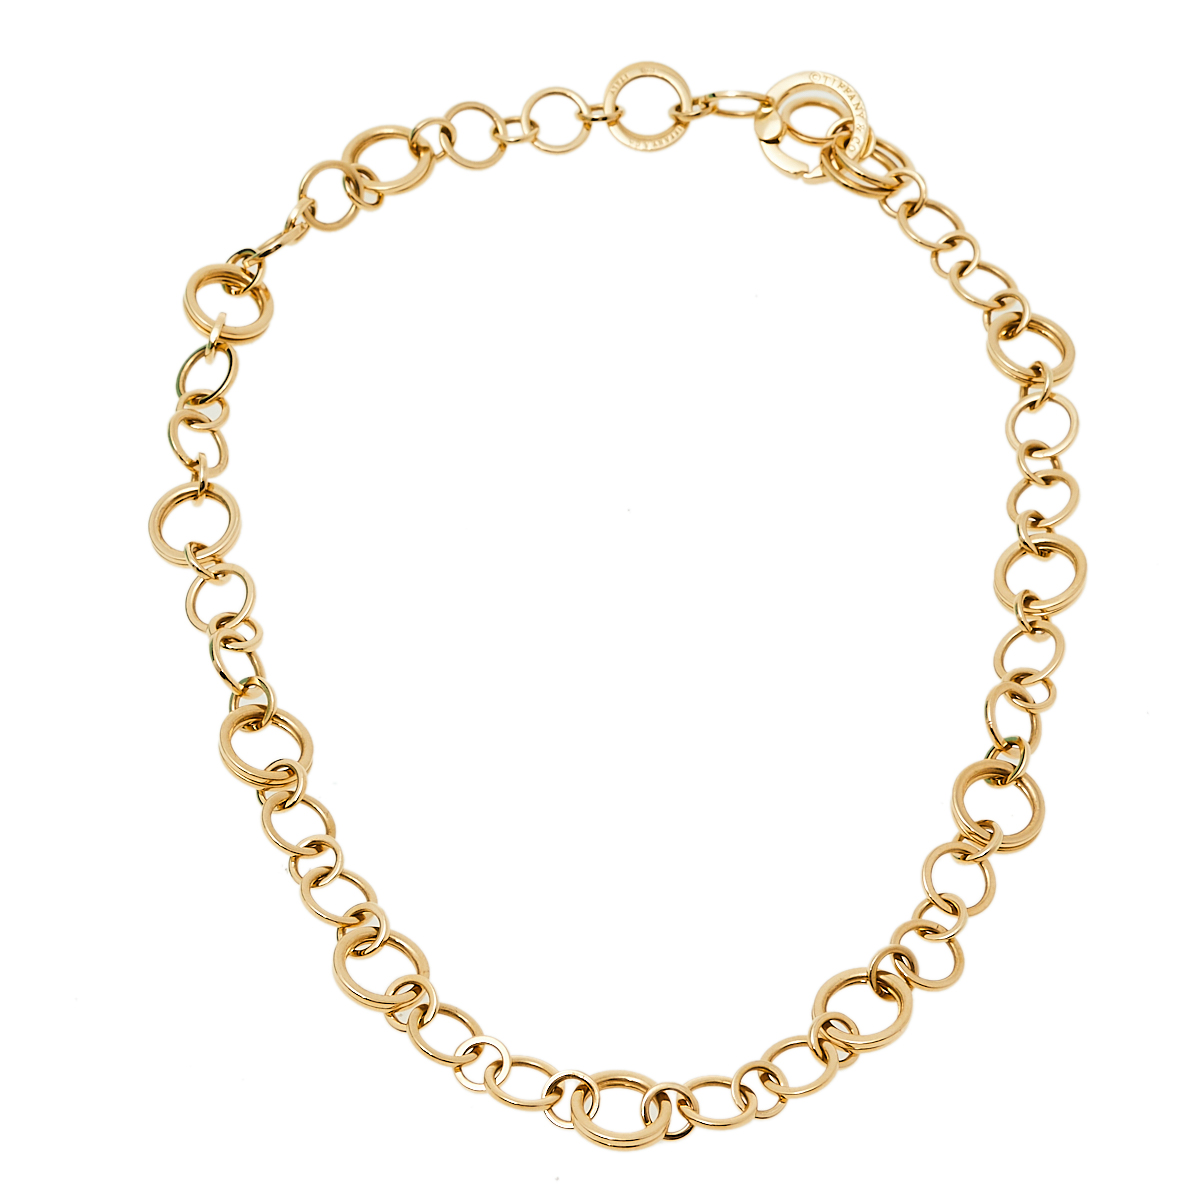 Tiffany & Co. 18K Yellow Gold Circle Chain Link Necklace